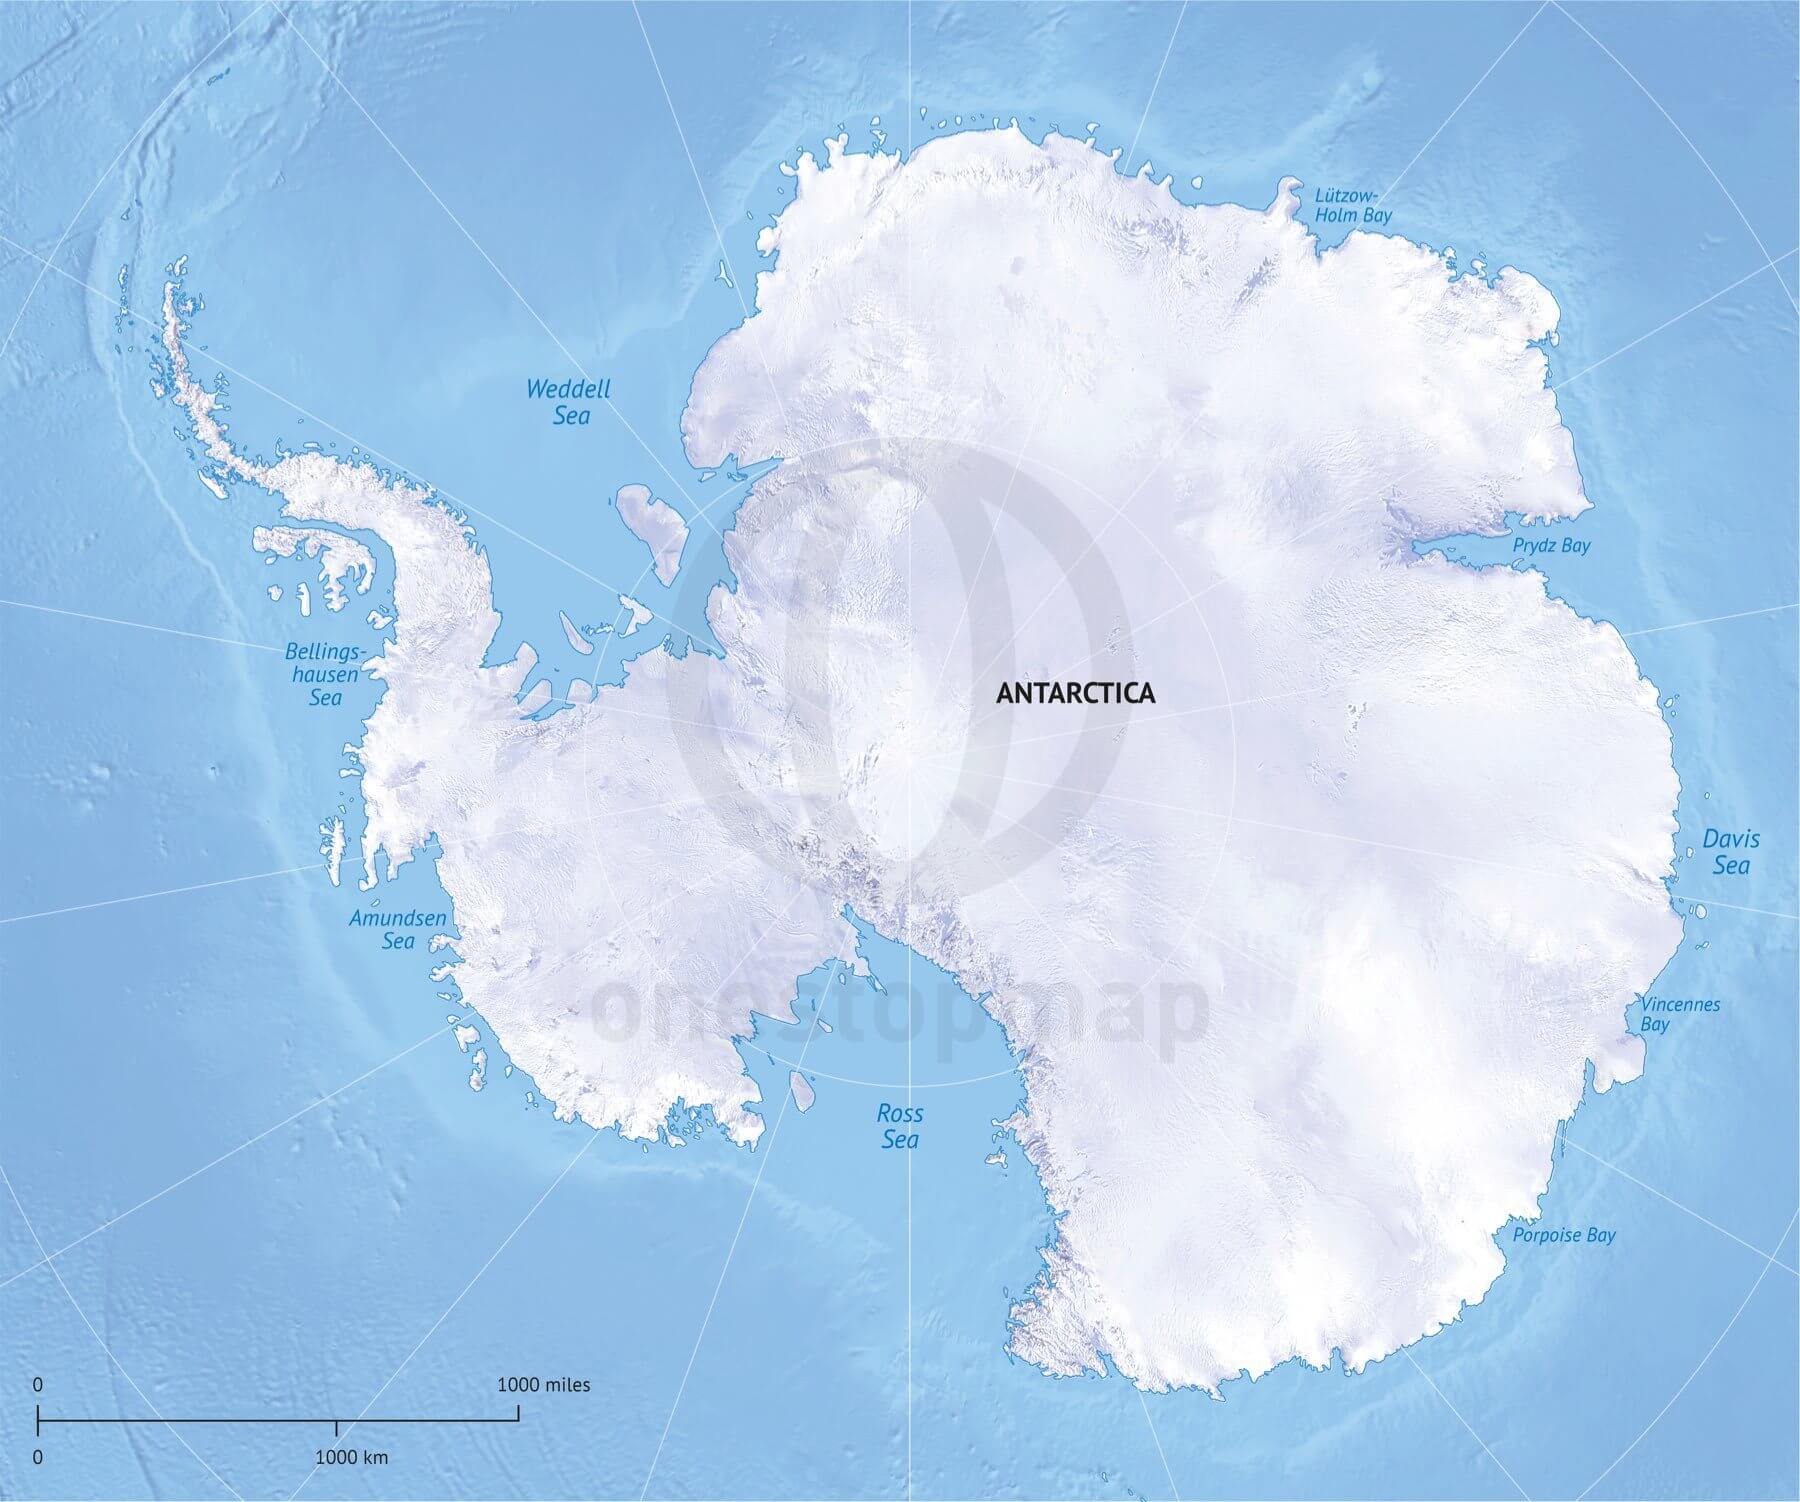 469-map-antarctica-continent-political-shaded-relief.jpg